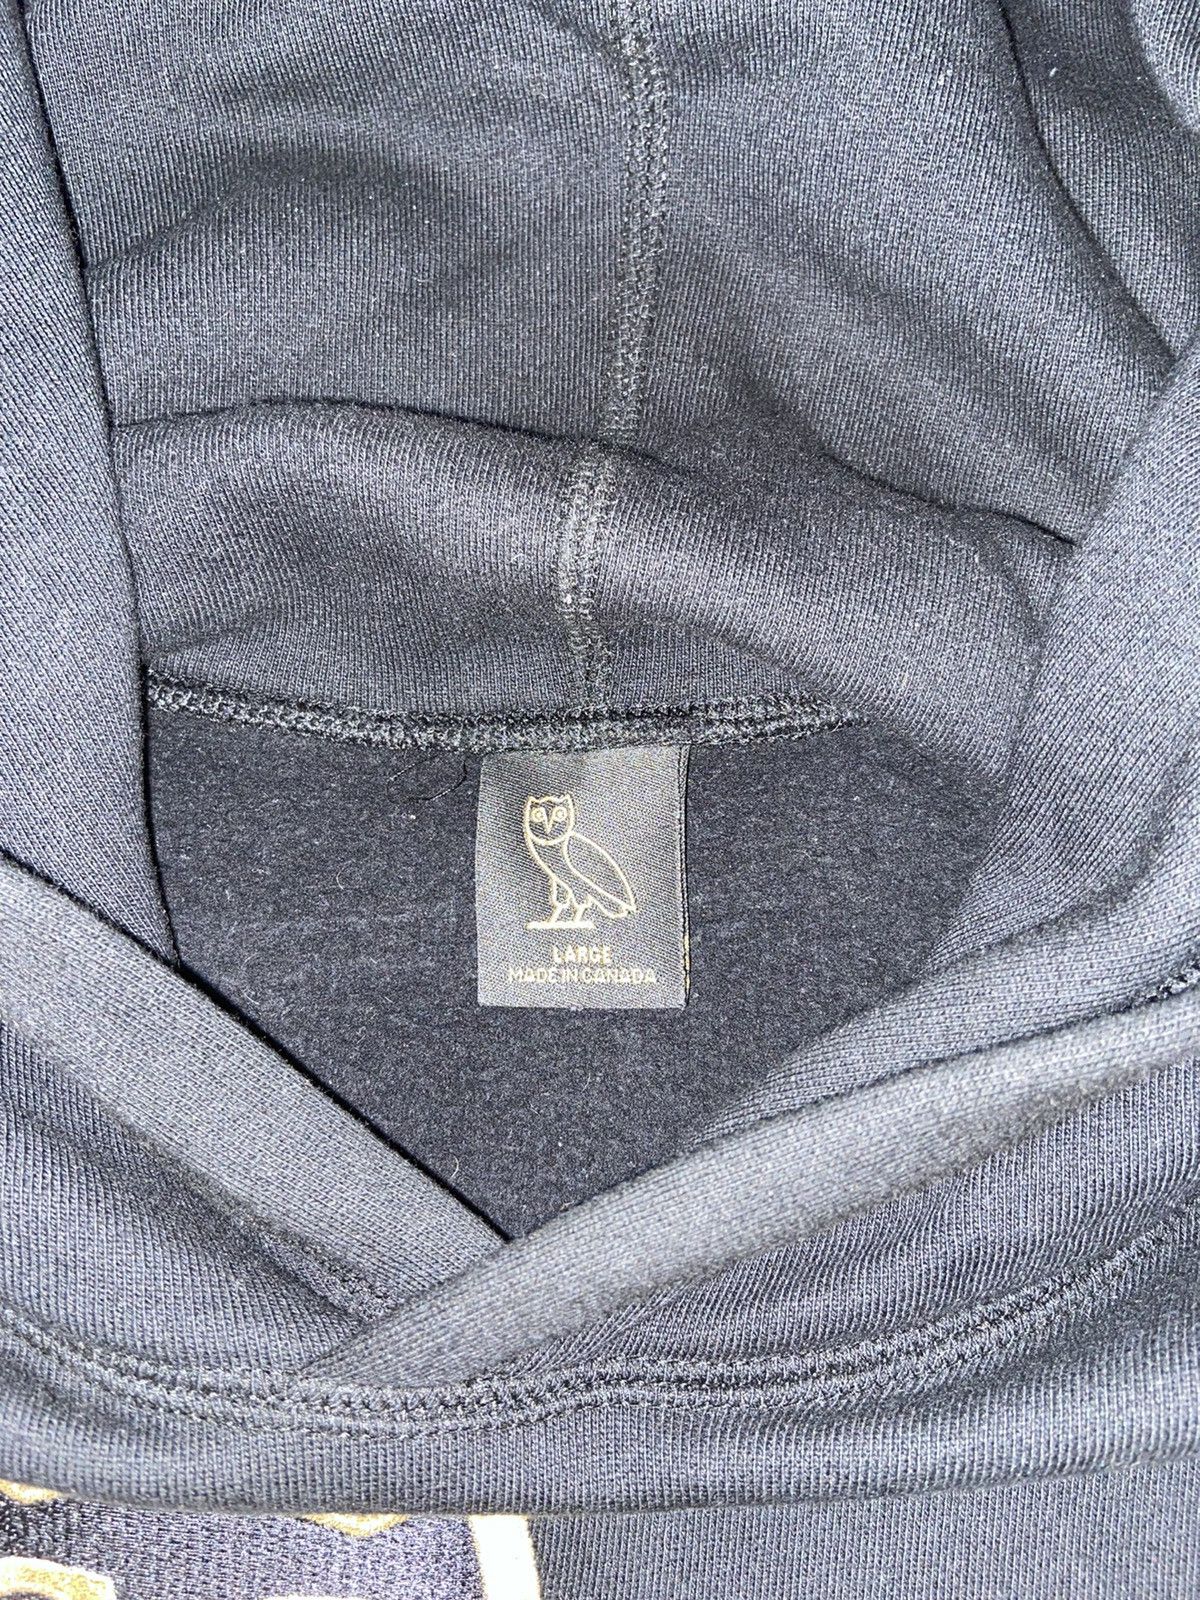 Octobers Very Own Drake OVO OG Owl Hoodie Gold Embroidered Black Size US L / EU 52-54 / 3 - 3 Thumbnail